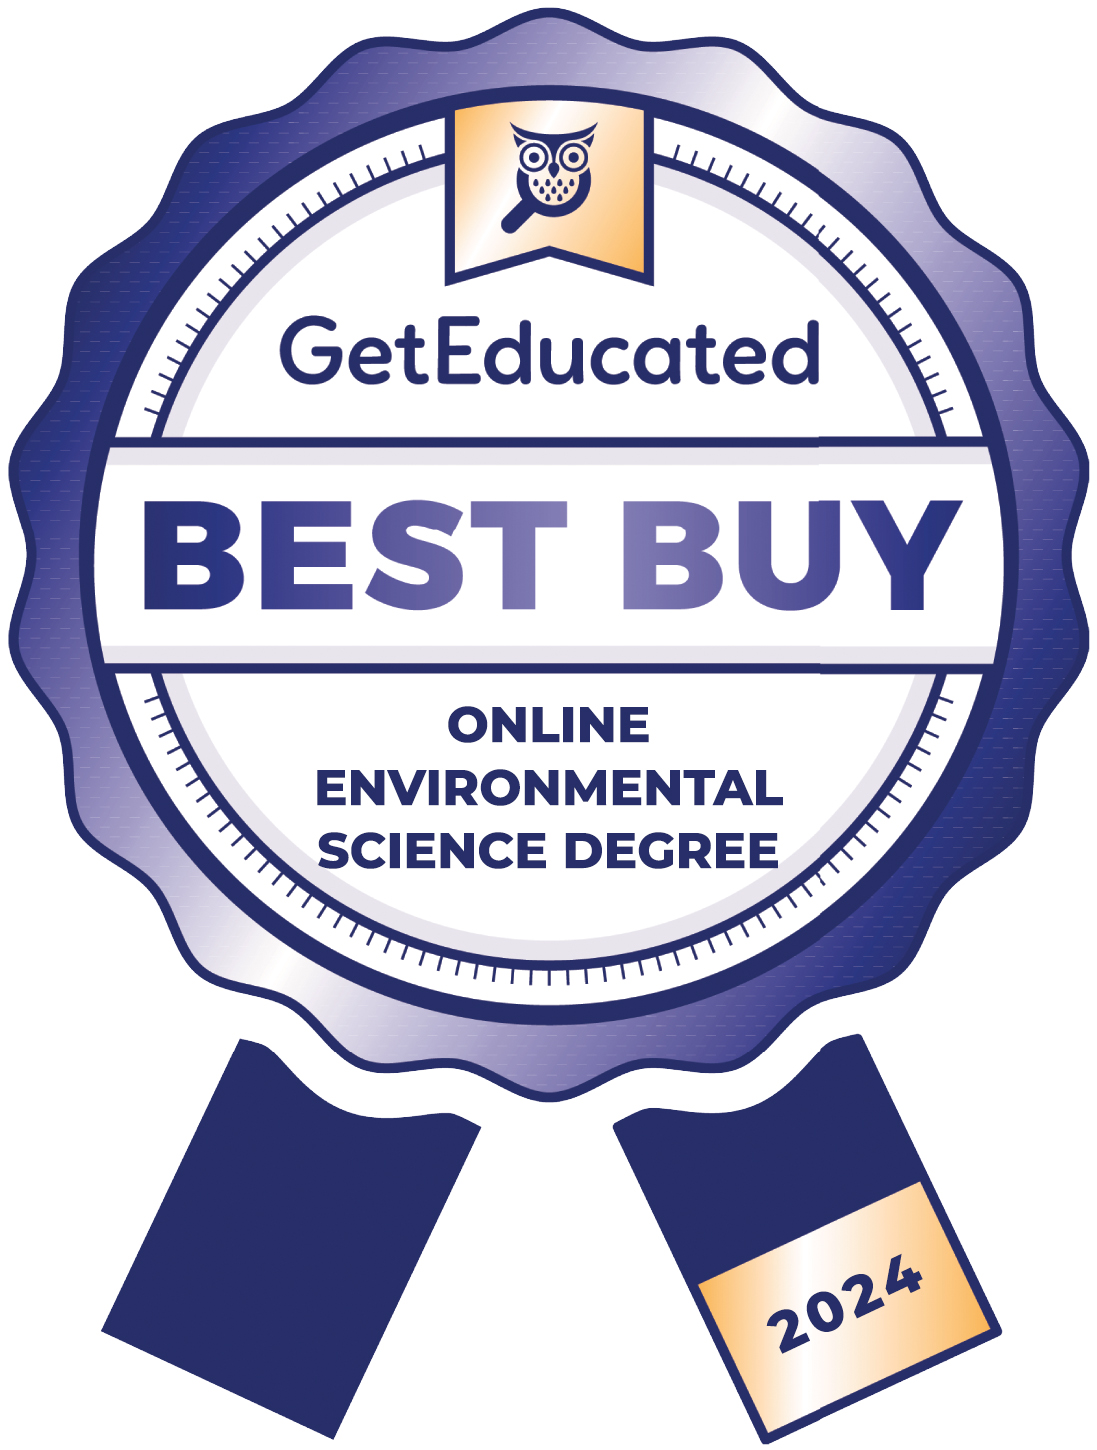 Rankings of the cheapest online environmental science degree programs